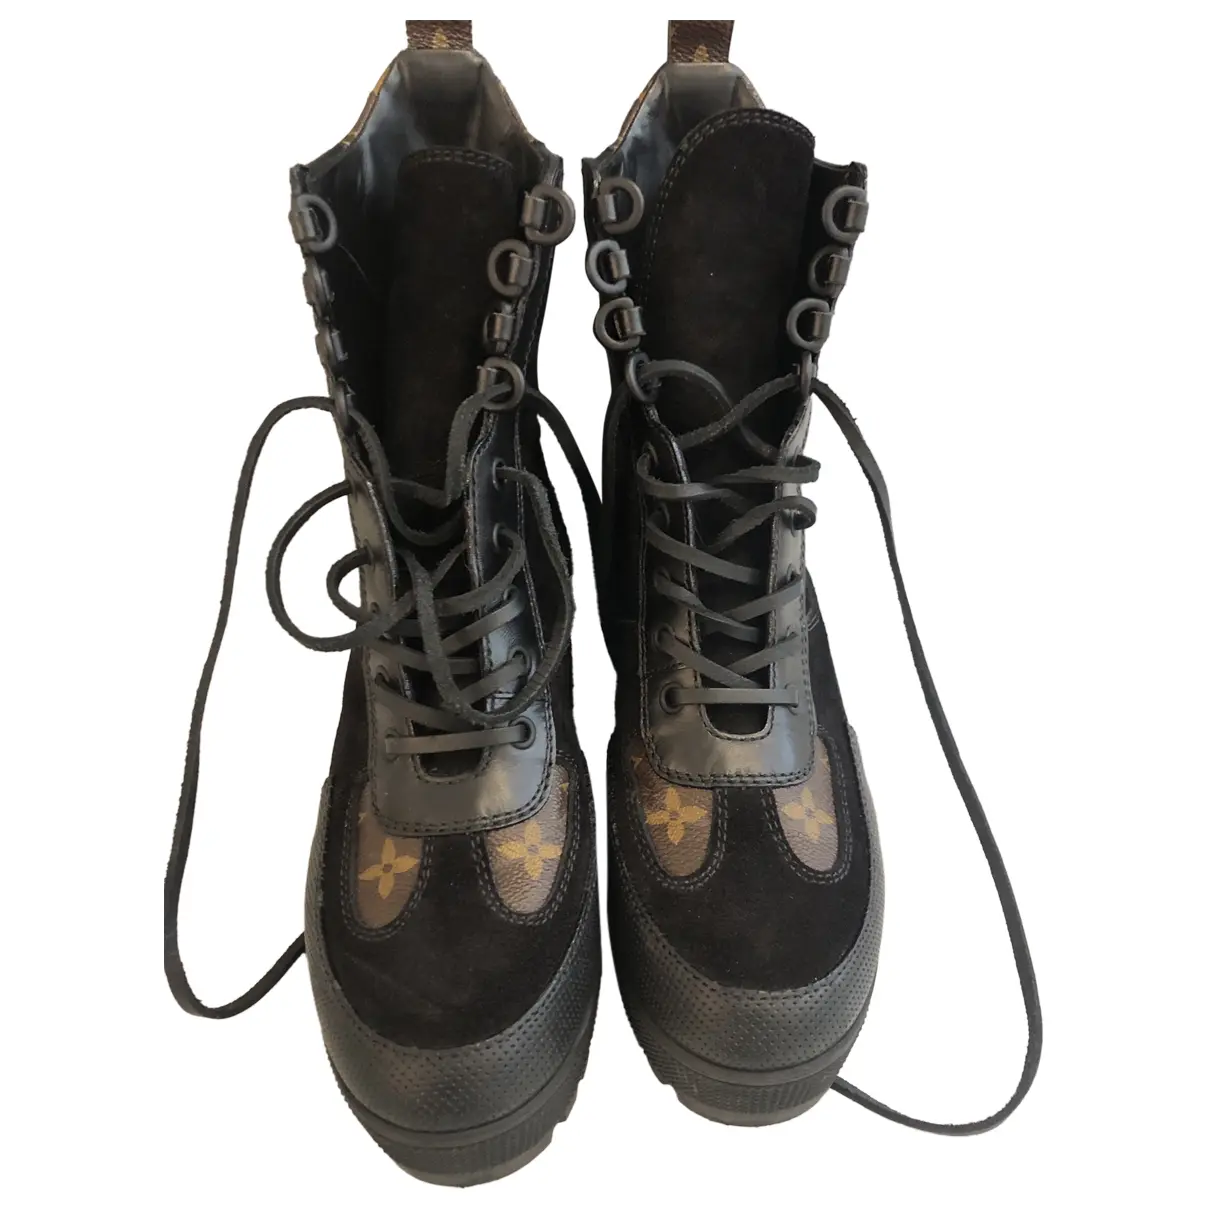 Laureate ankle patent leather lace up boots